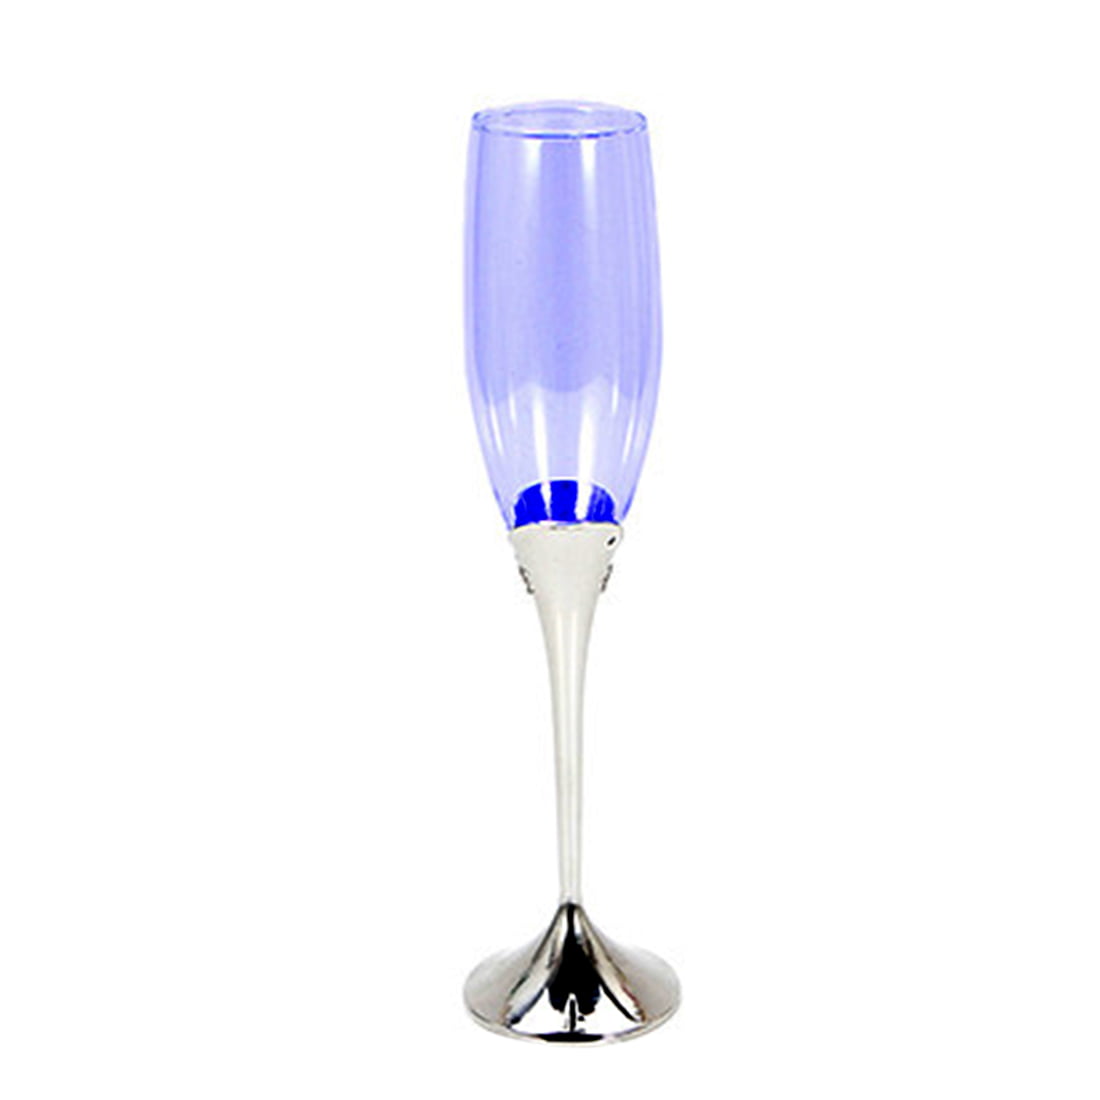 Healifty LED Light Up Wine Glasses Champagne Flute's Cocktail Flashing Cups for Bar Party Night Club Drink Christmas Wedding Party Decoration